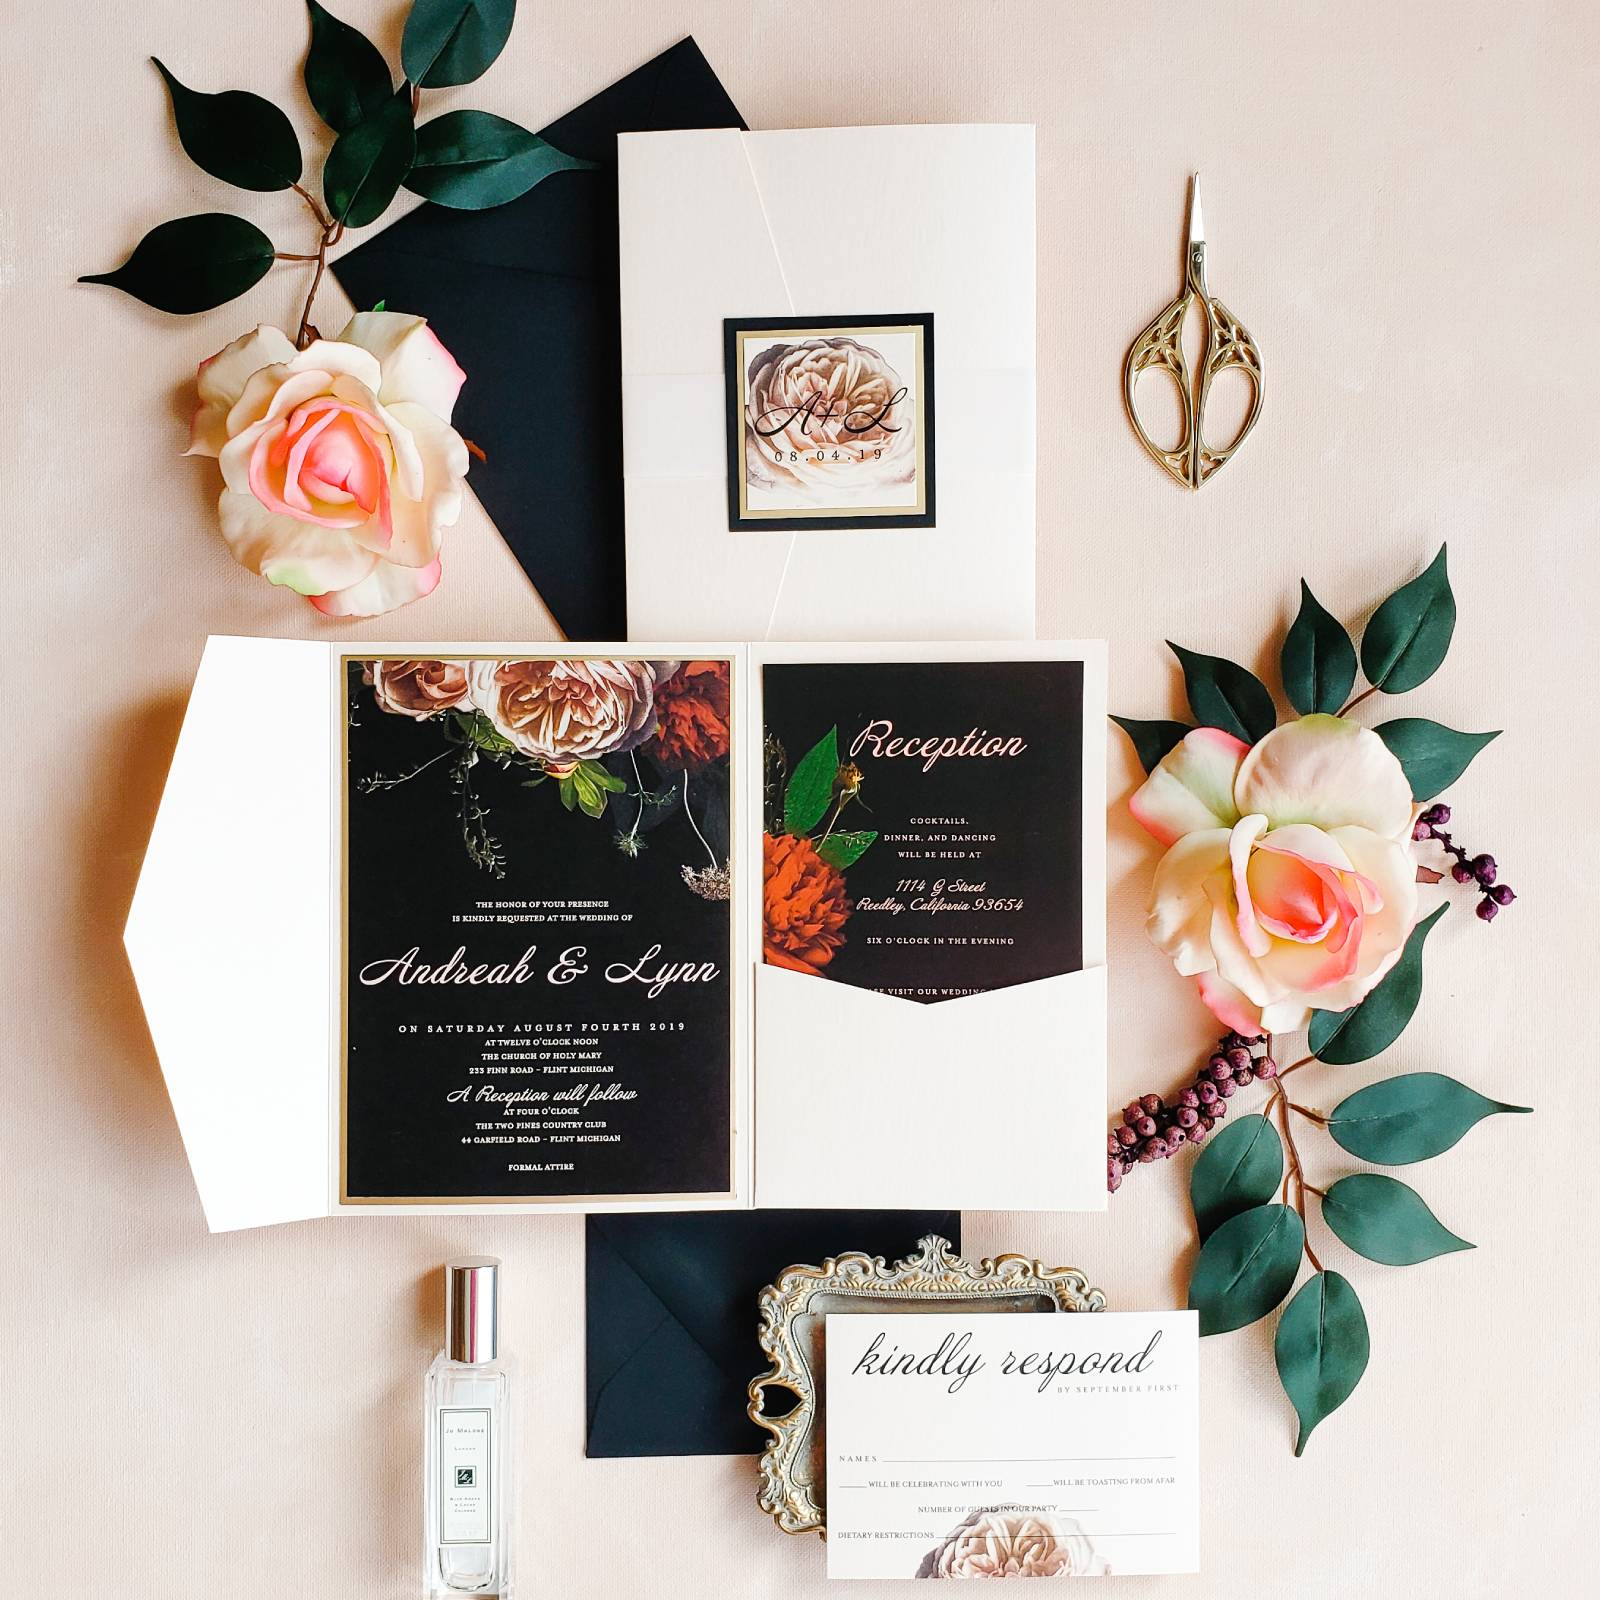 [vc_row][vc_column][vc_column_text]Purchase this listing to get a sample of our Hamburg wedding invitation suite.

The sample includes:

• 5.25